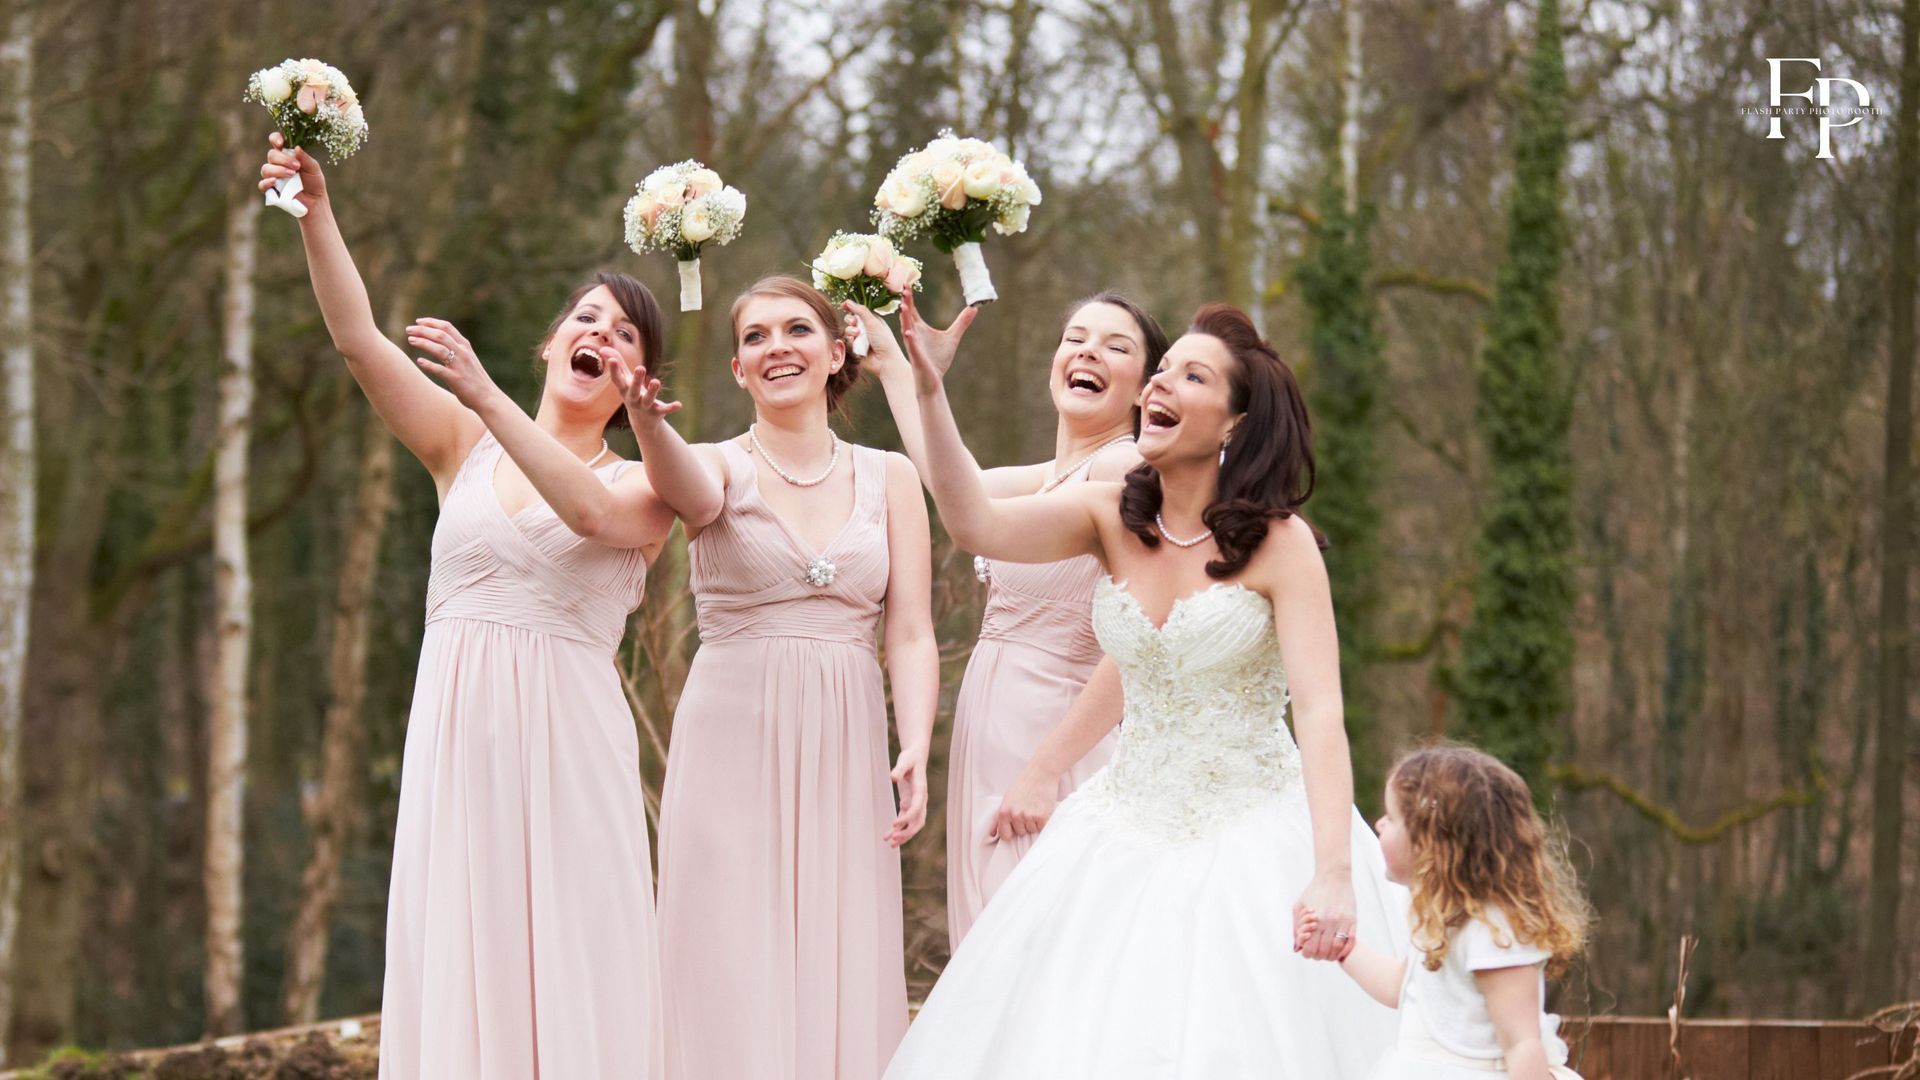 The bride and her bridesmaids toss their bouquets with laughter and excitement during a San Antonio destination wedding